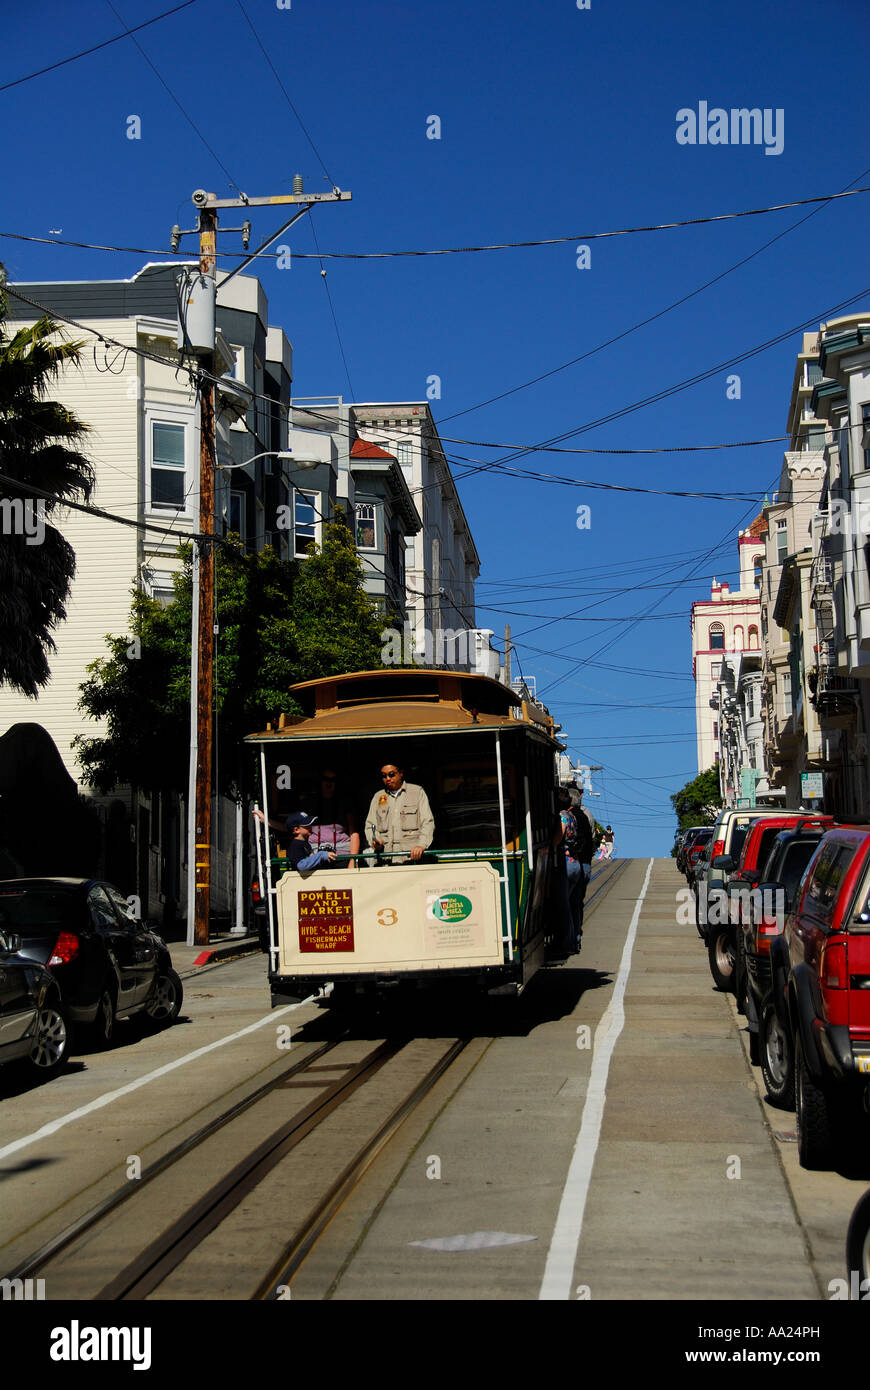 San Francisco Cable Car traveling down one of the hills in the downtown area Stock Photo